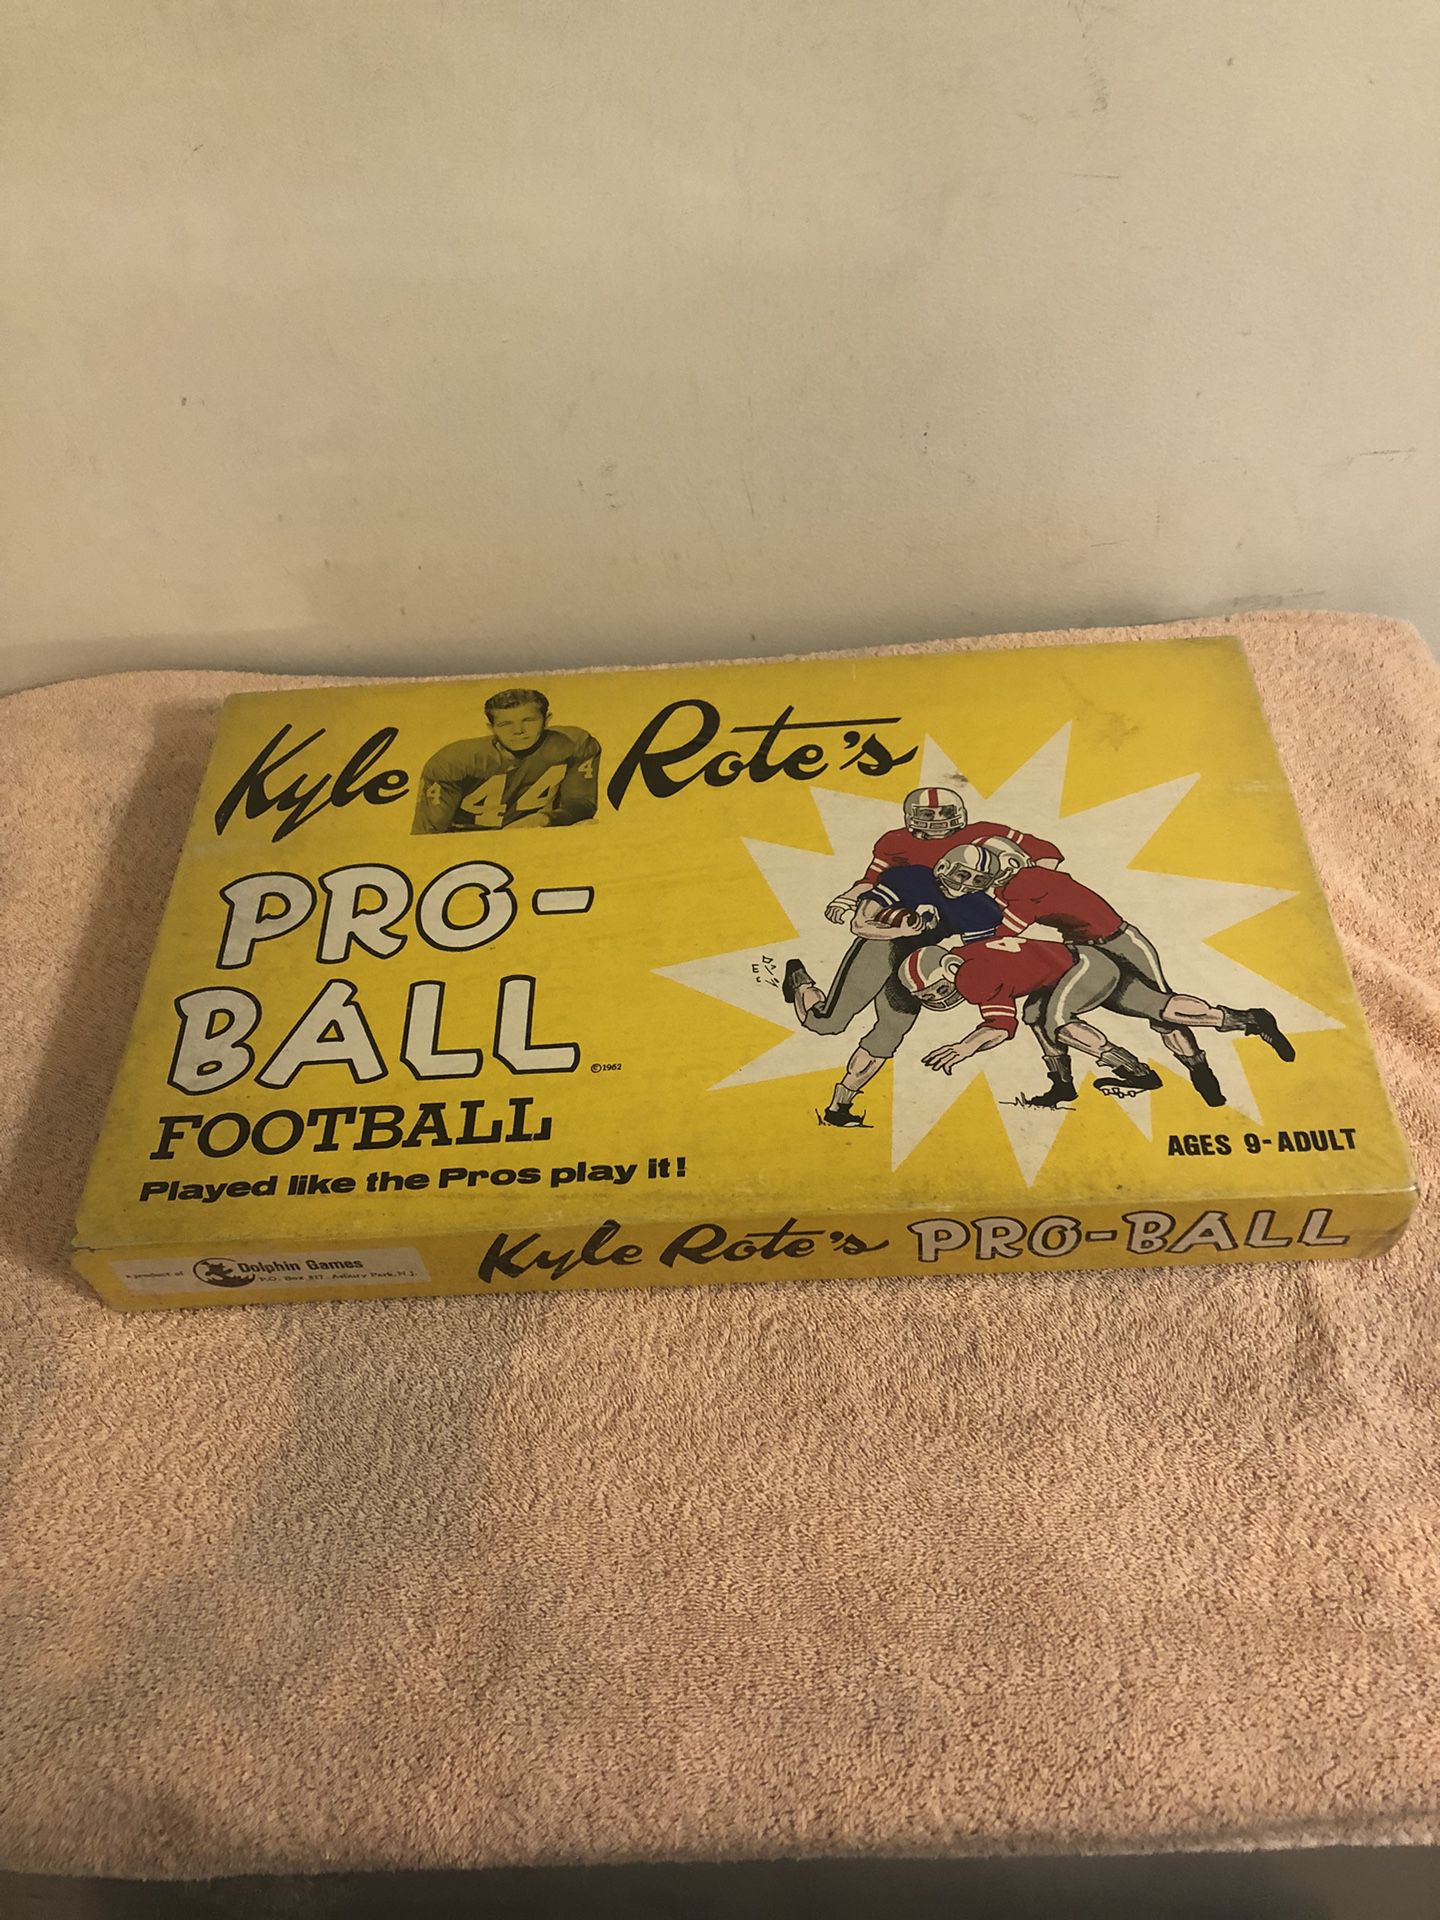 Vintage Kyle Rote’s Pro Ball Football Game #11S500 Still Sealed